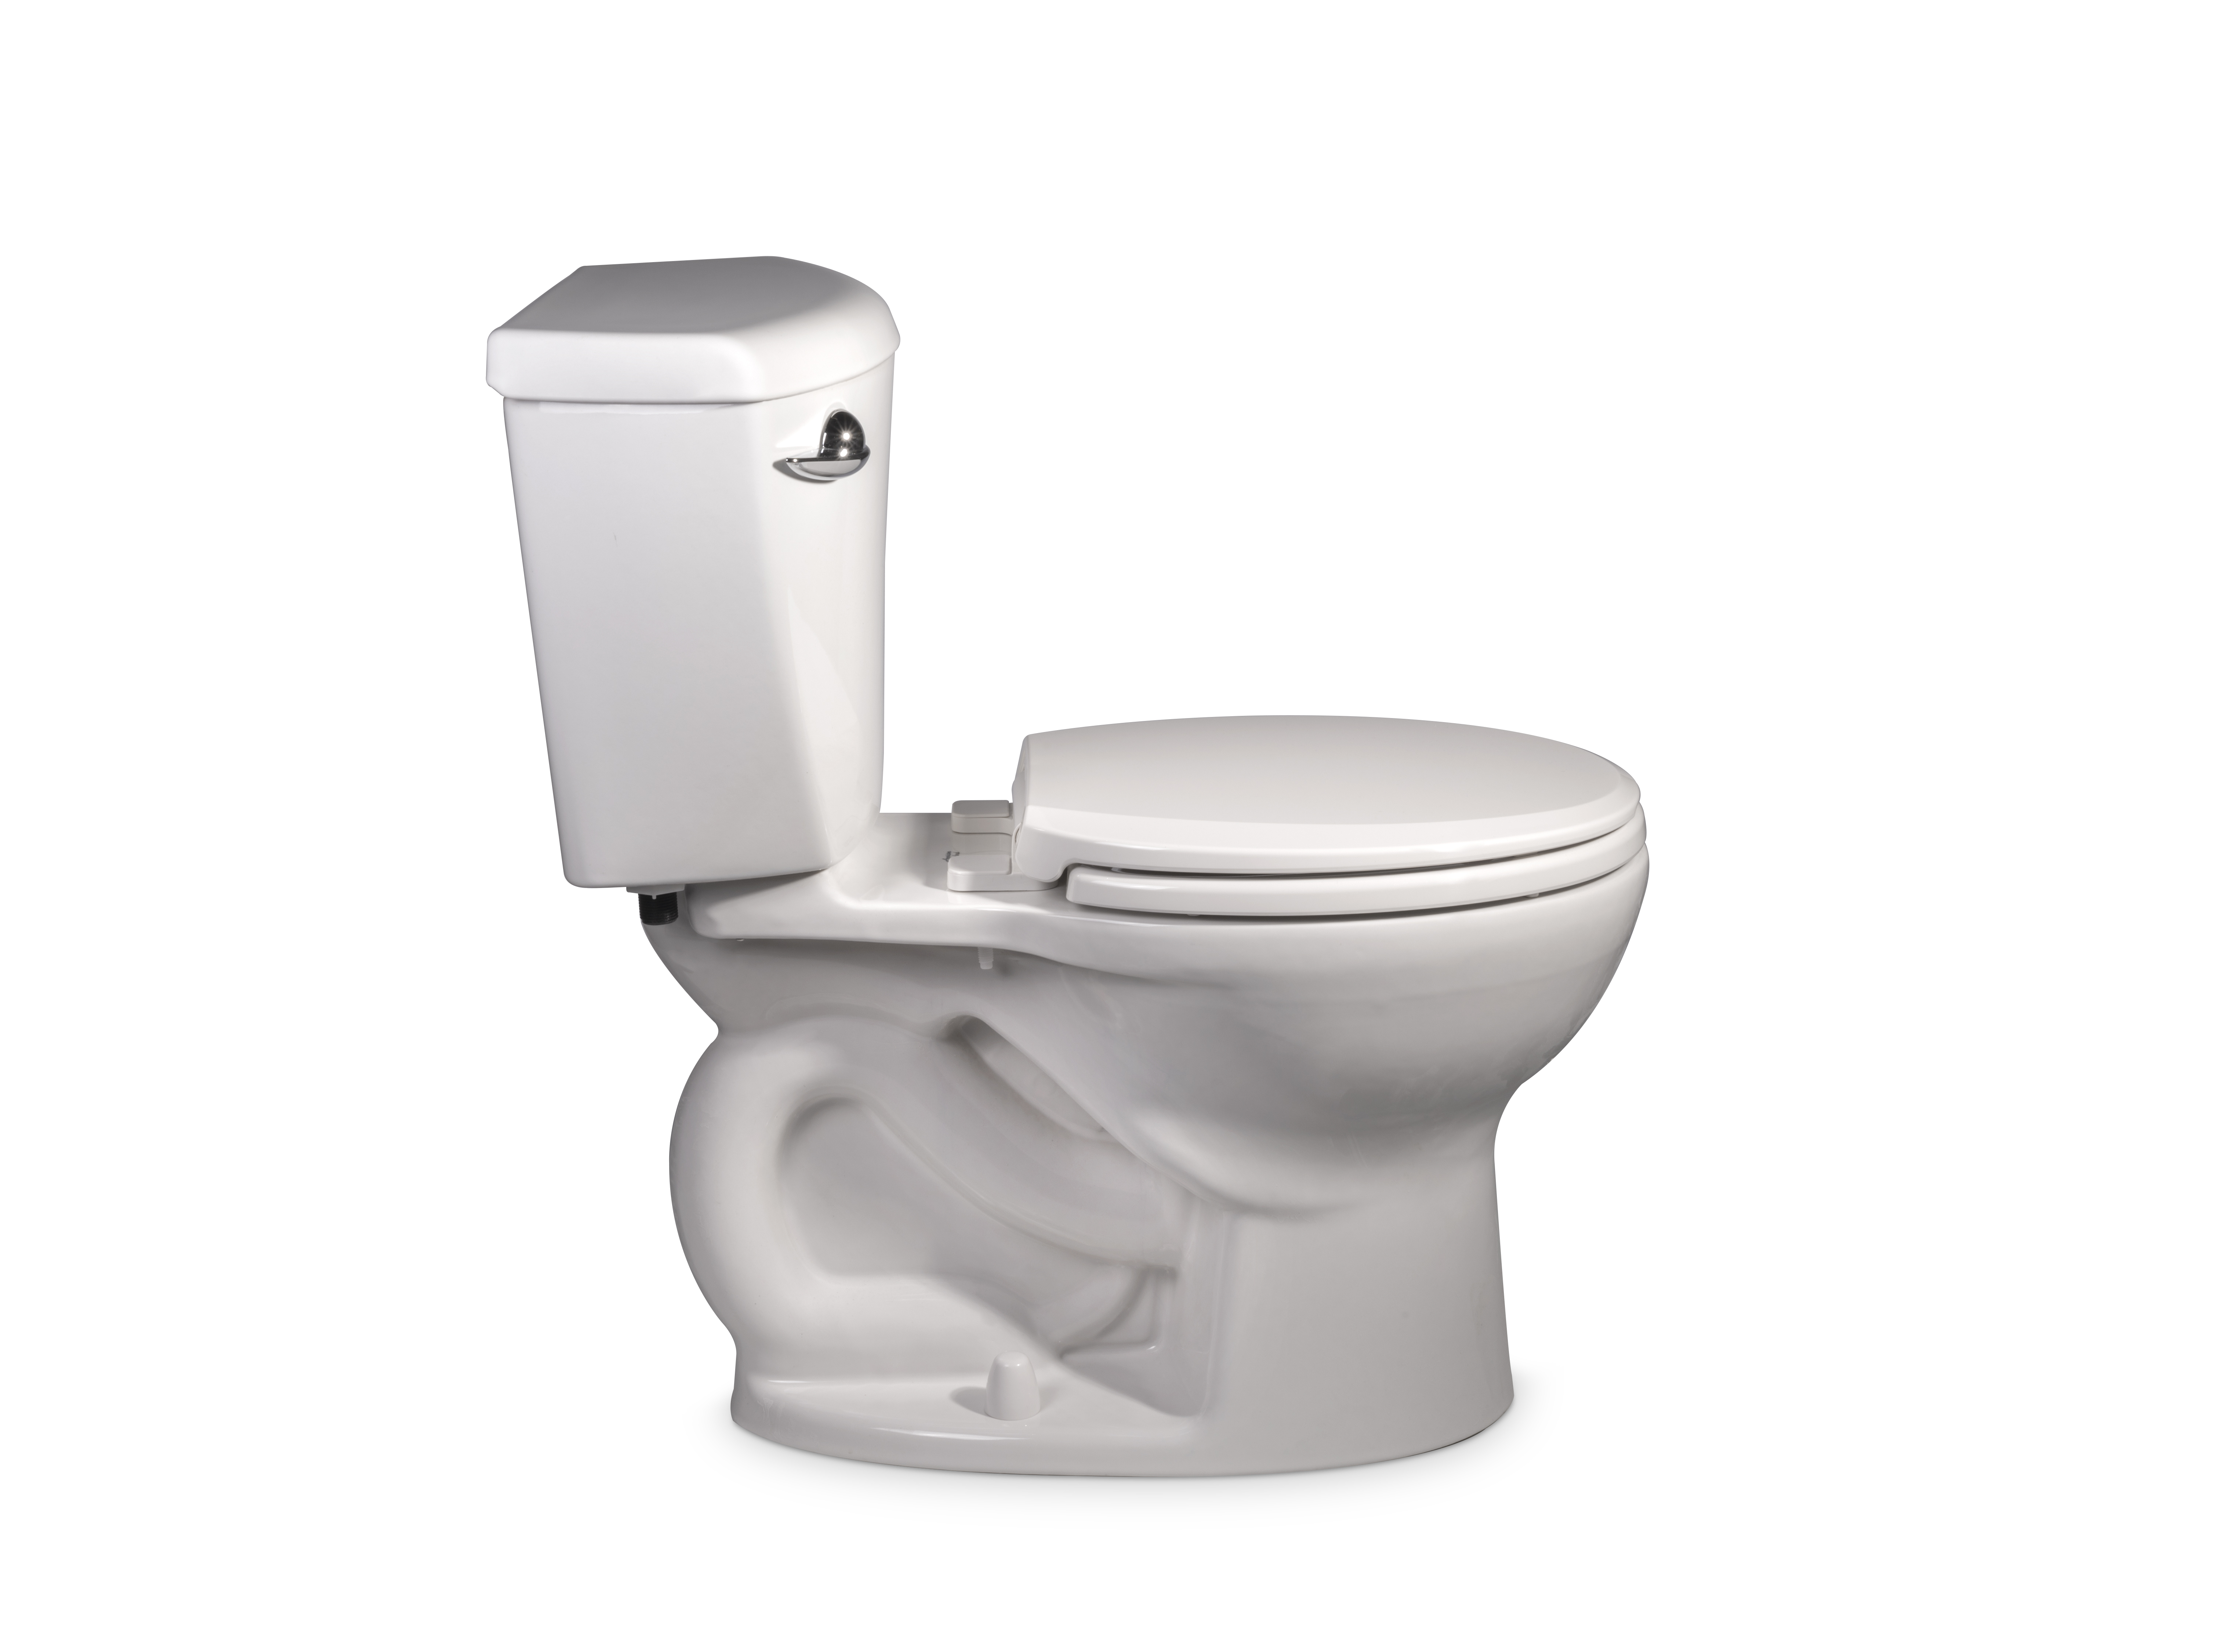 Ravenna 3 Two-Piece 1.6 gpf/6.0 Lpf Standard Height Round Front Complete Toilet With Seat and Lined Tank